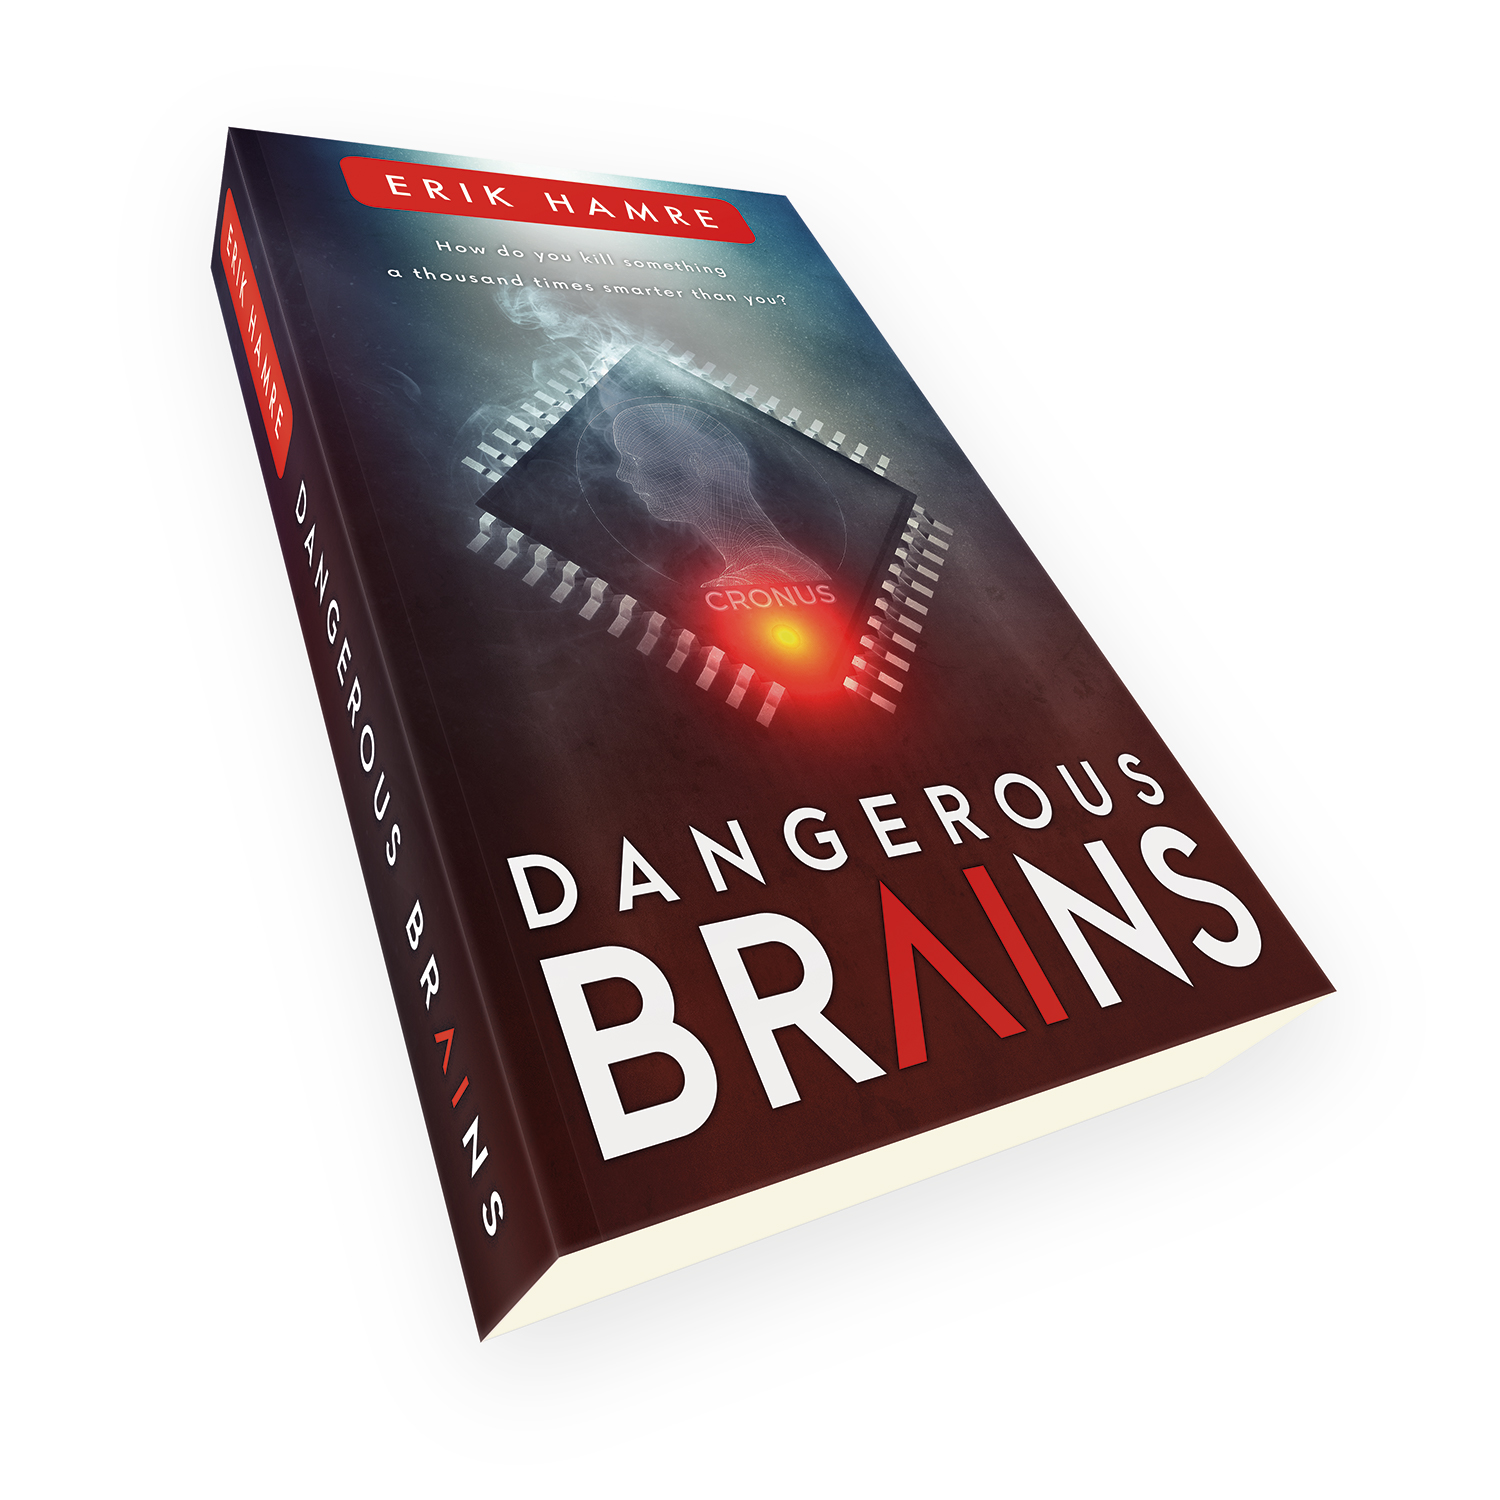 'Dangerous Brains' is a stylish military scifi cyber thriller, by Erik Hamre. The book cover was designed by Mark Thomas, of coverness.com. To find out more about my book design services, please visit www.coverness.com.